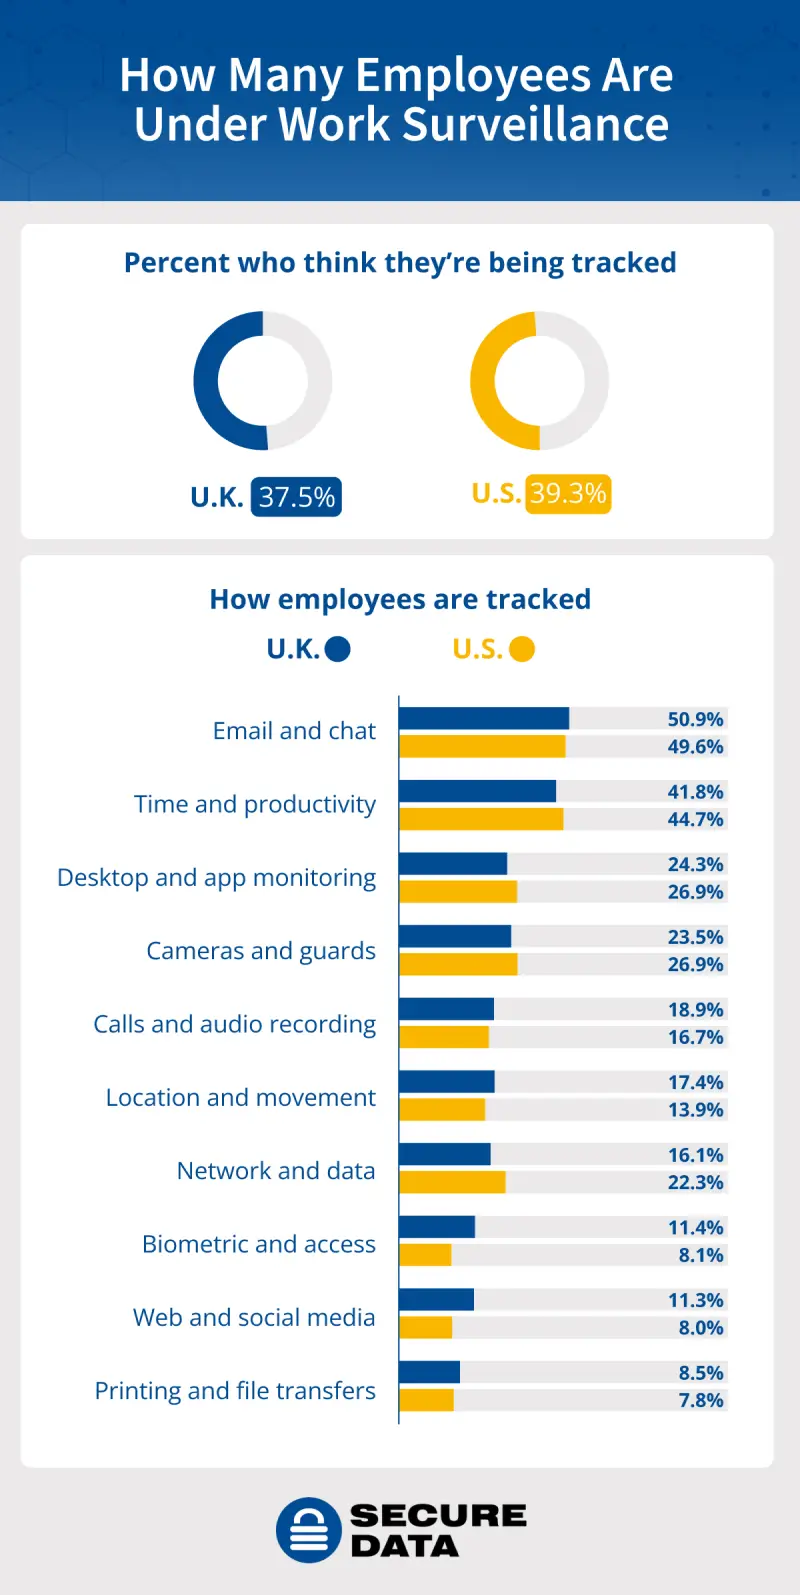 Dashboard showing the number of U.S. and U.K. employees surveilled by tracking method